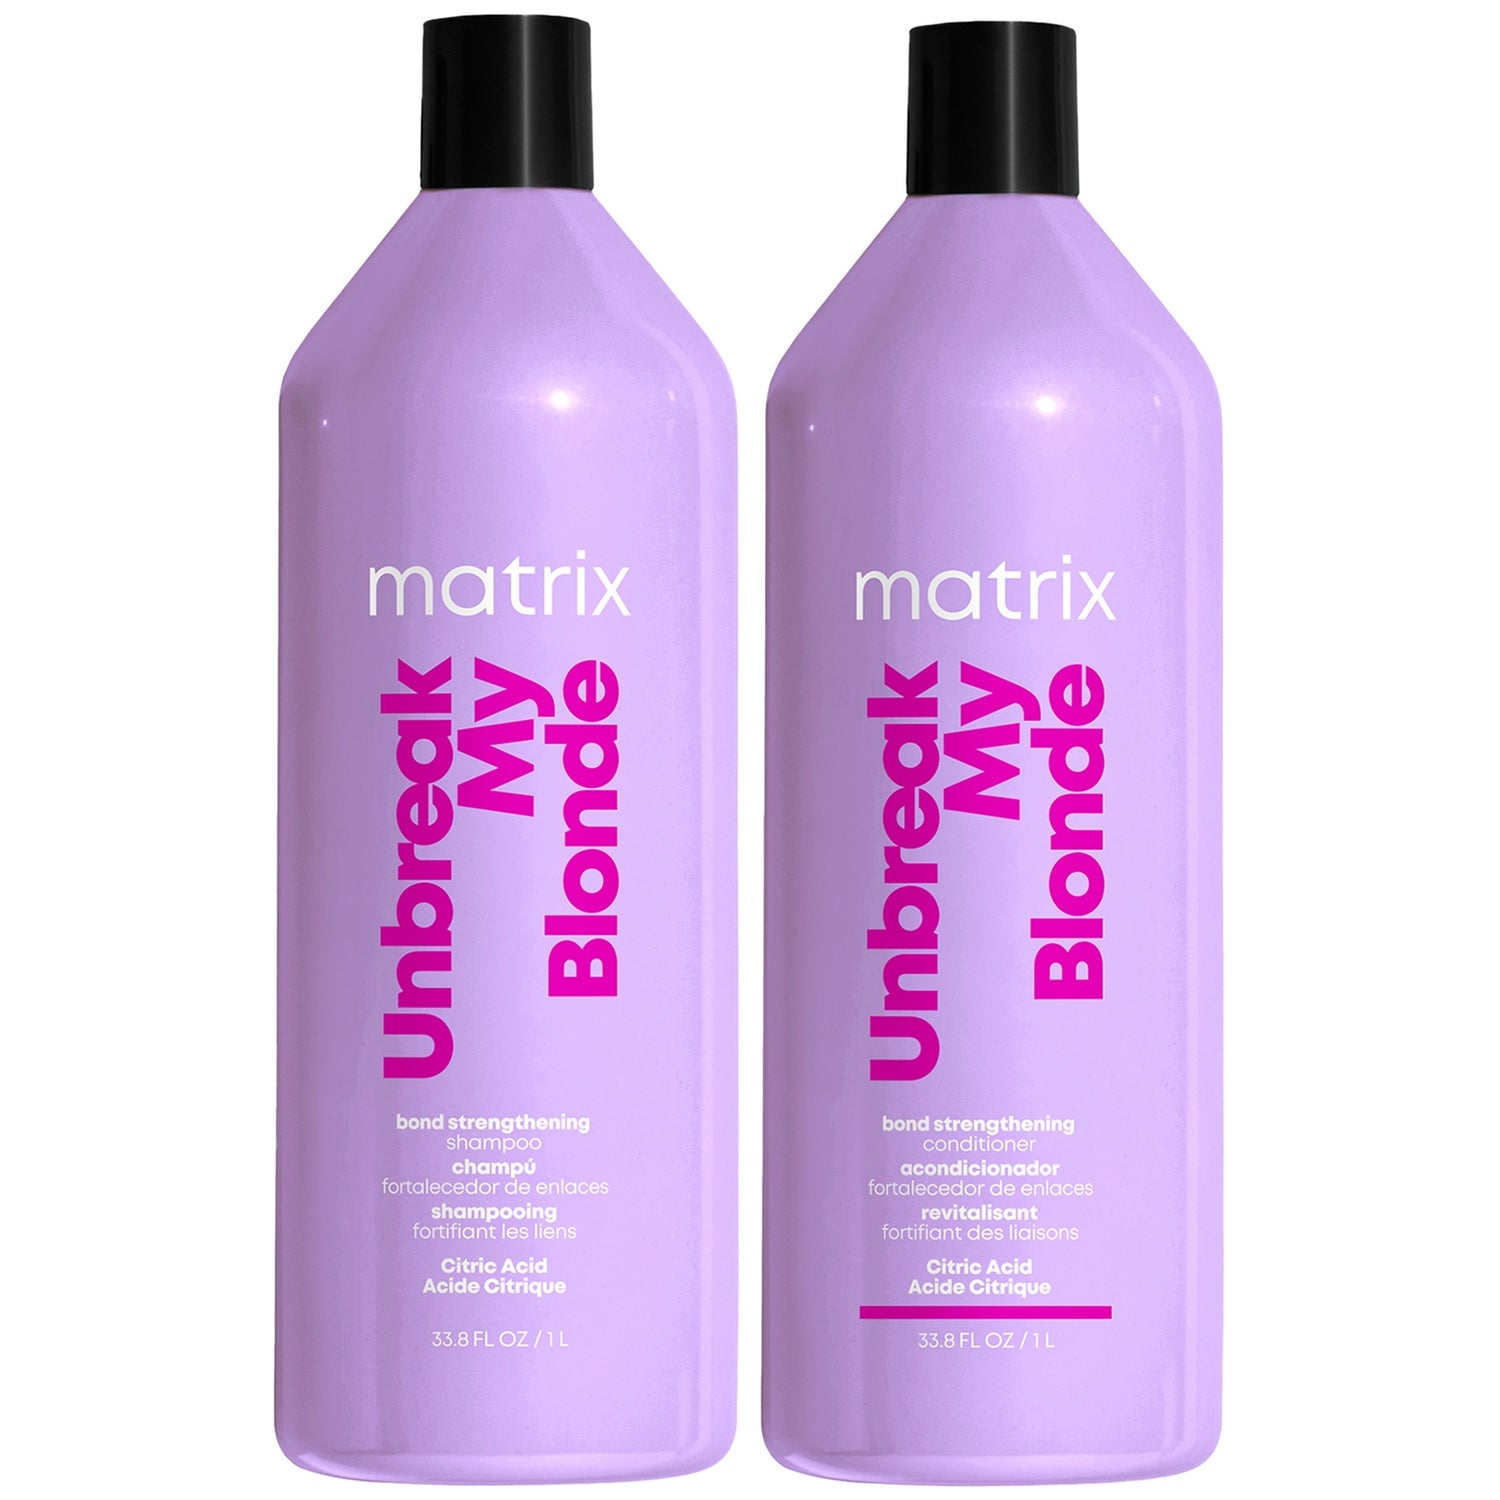 Matrix Total Results Unbreak My Blonde Duo shampoing et après-shampoing 1000ml